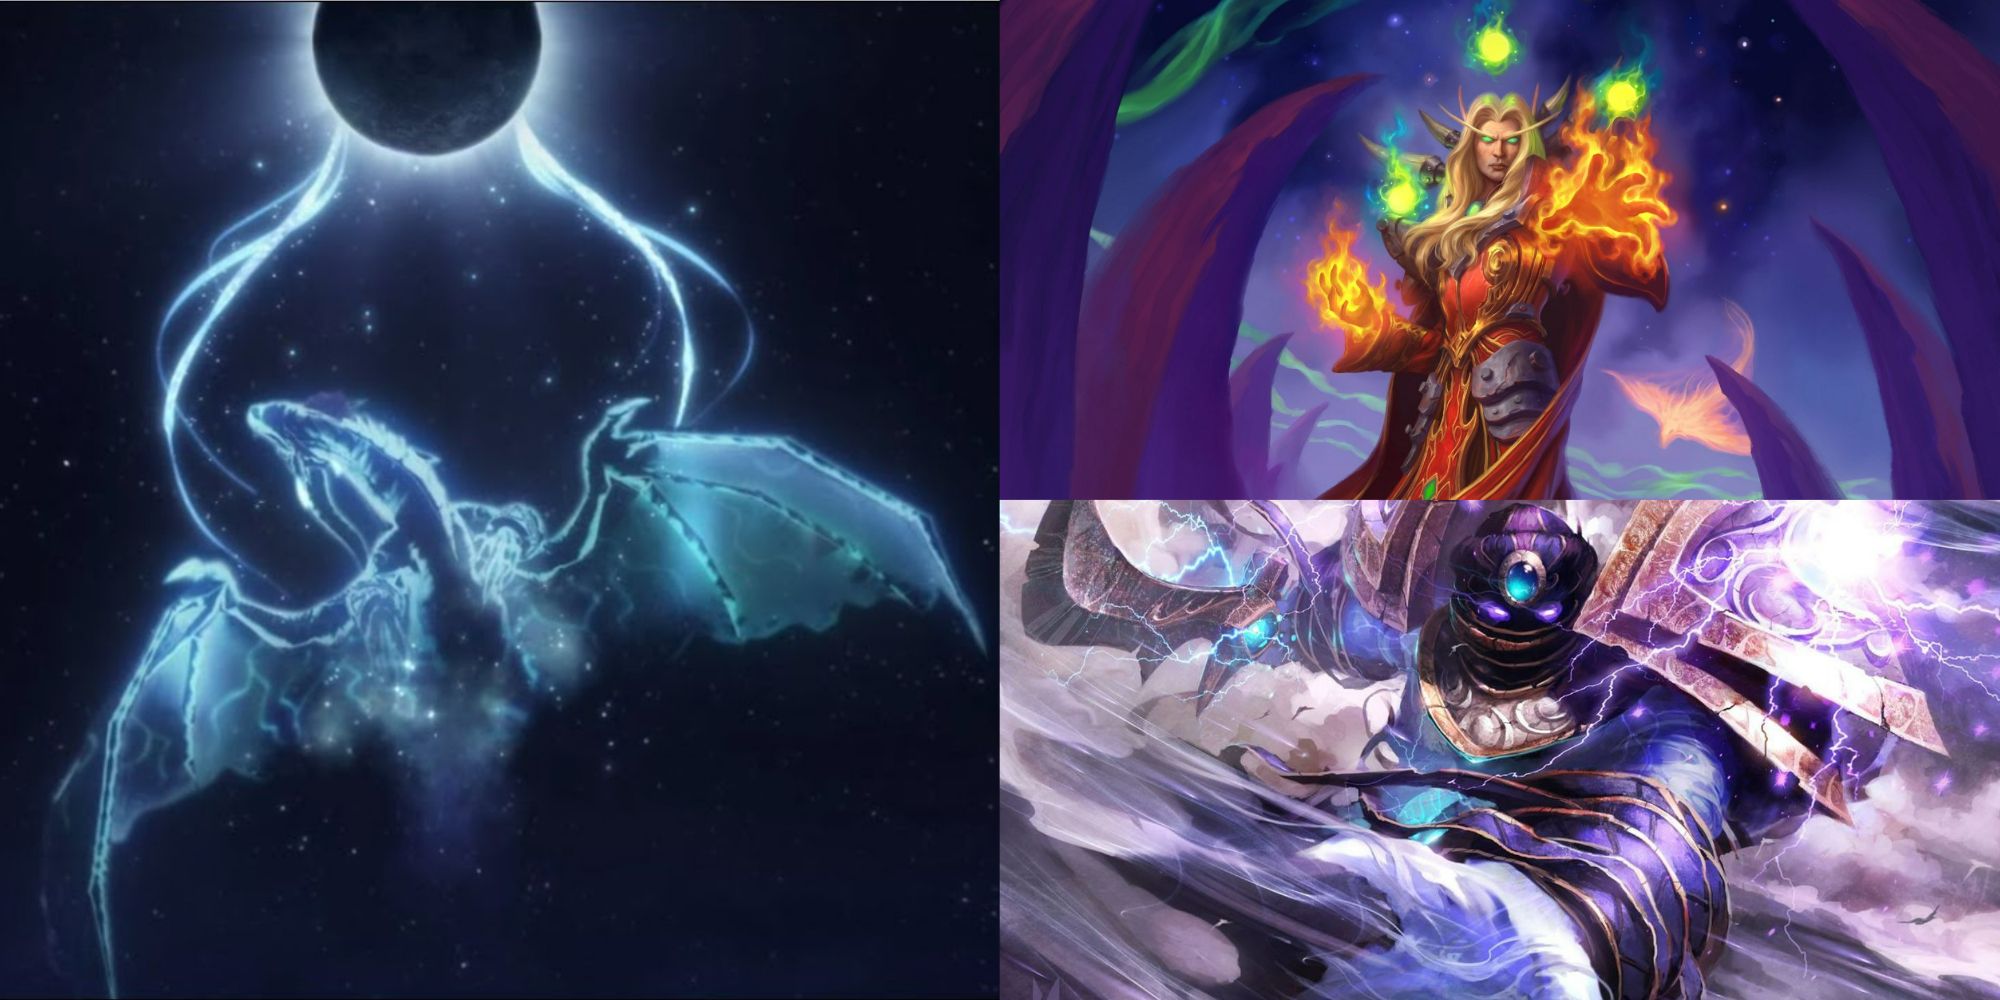 Hearthstone split image of Al'akir and Kael'thas splash arts and World of Warcraft cinematic shot of Ysera as a constellation